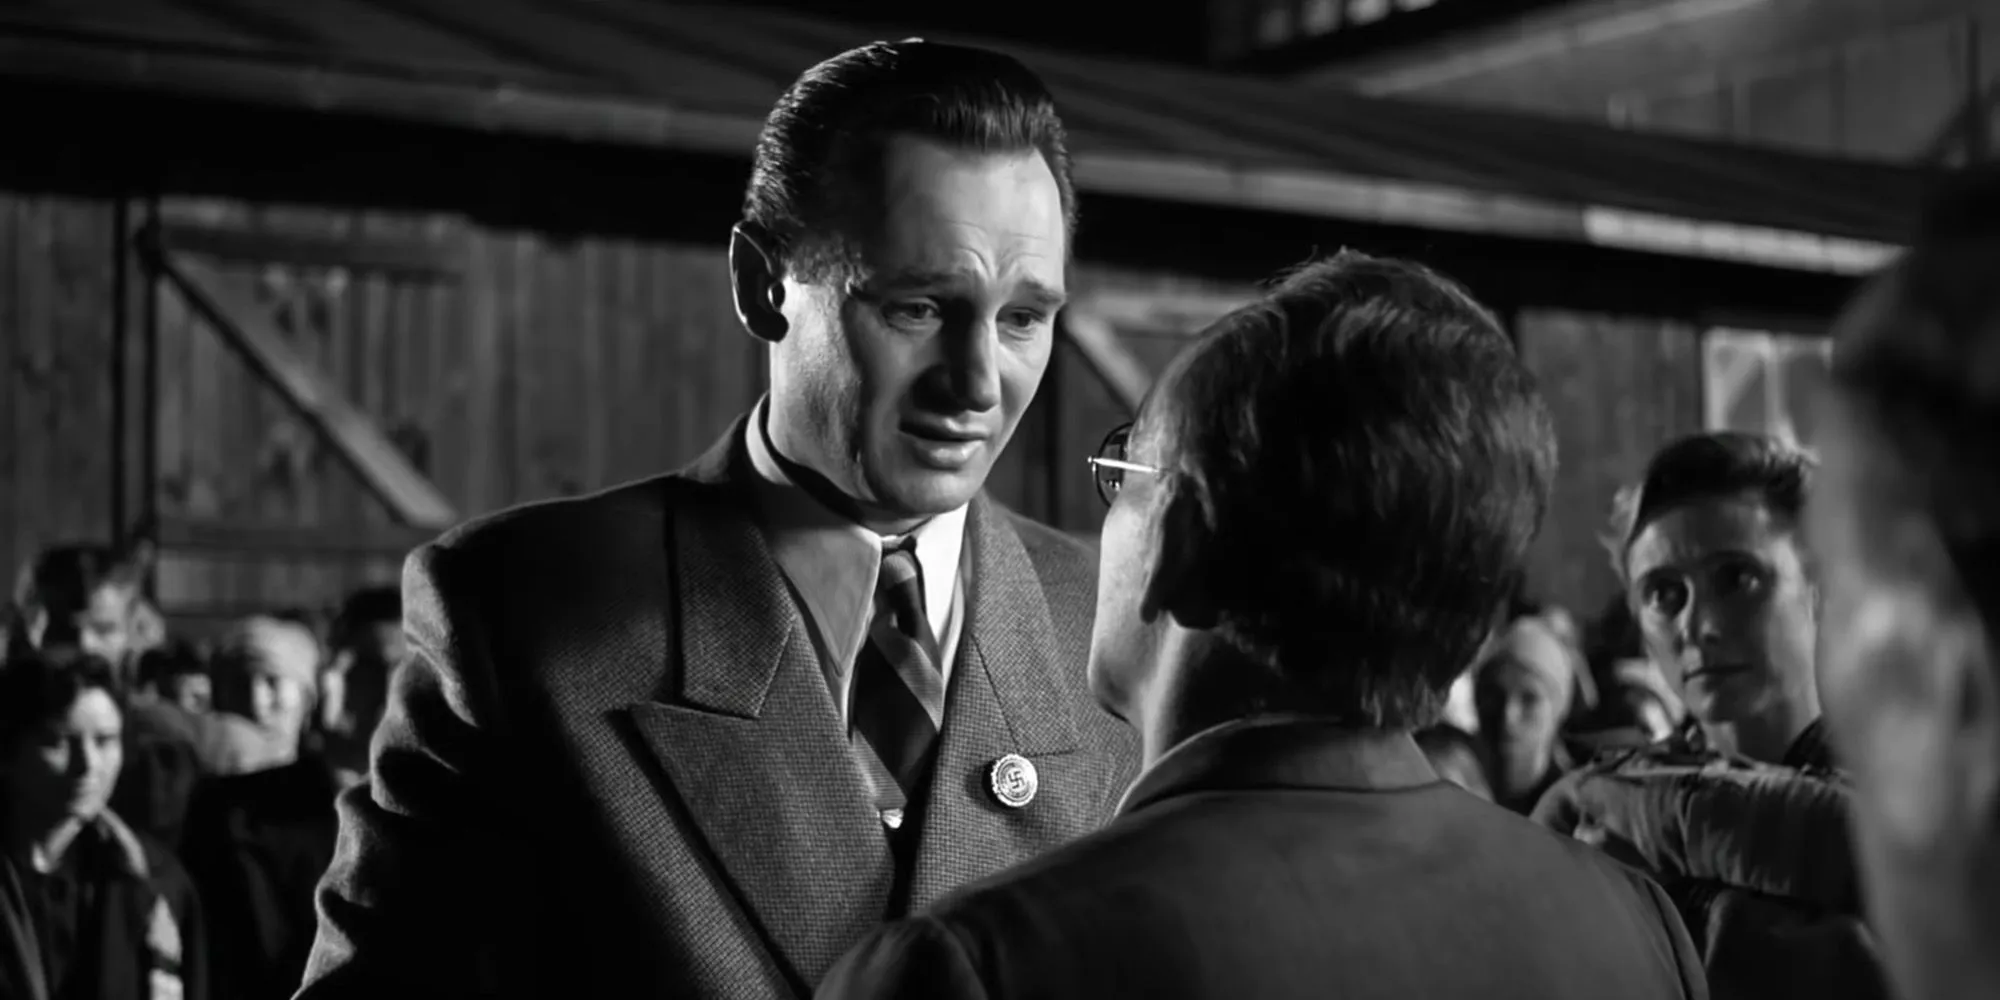 Liam Neeson as Oskar Schindler crying while facing a man in Schindler’s List